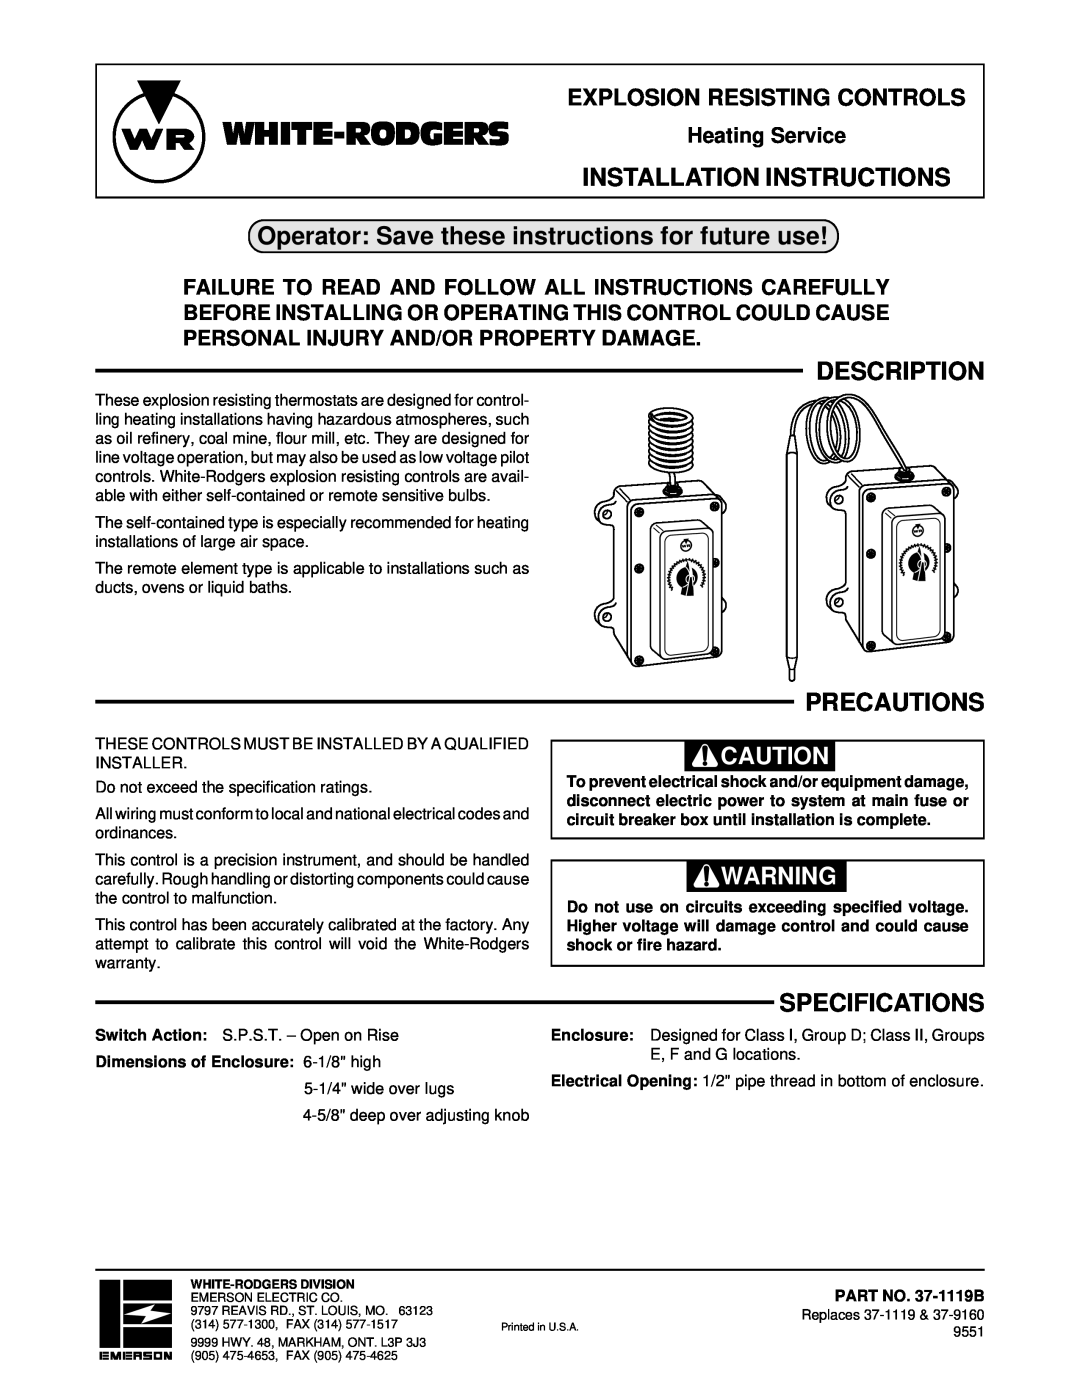 White Rodgers 37-1119B installation instructions White-Rodgers, Operator Save these instructions for future use 